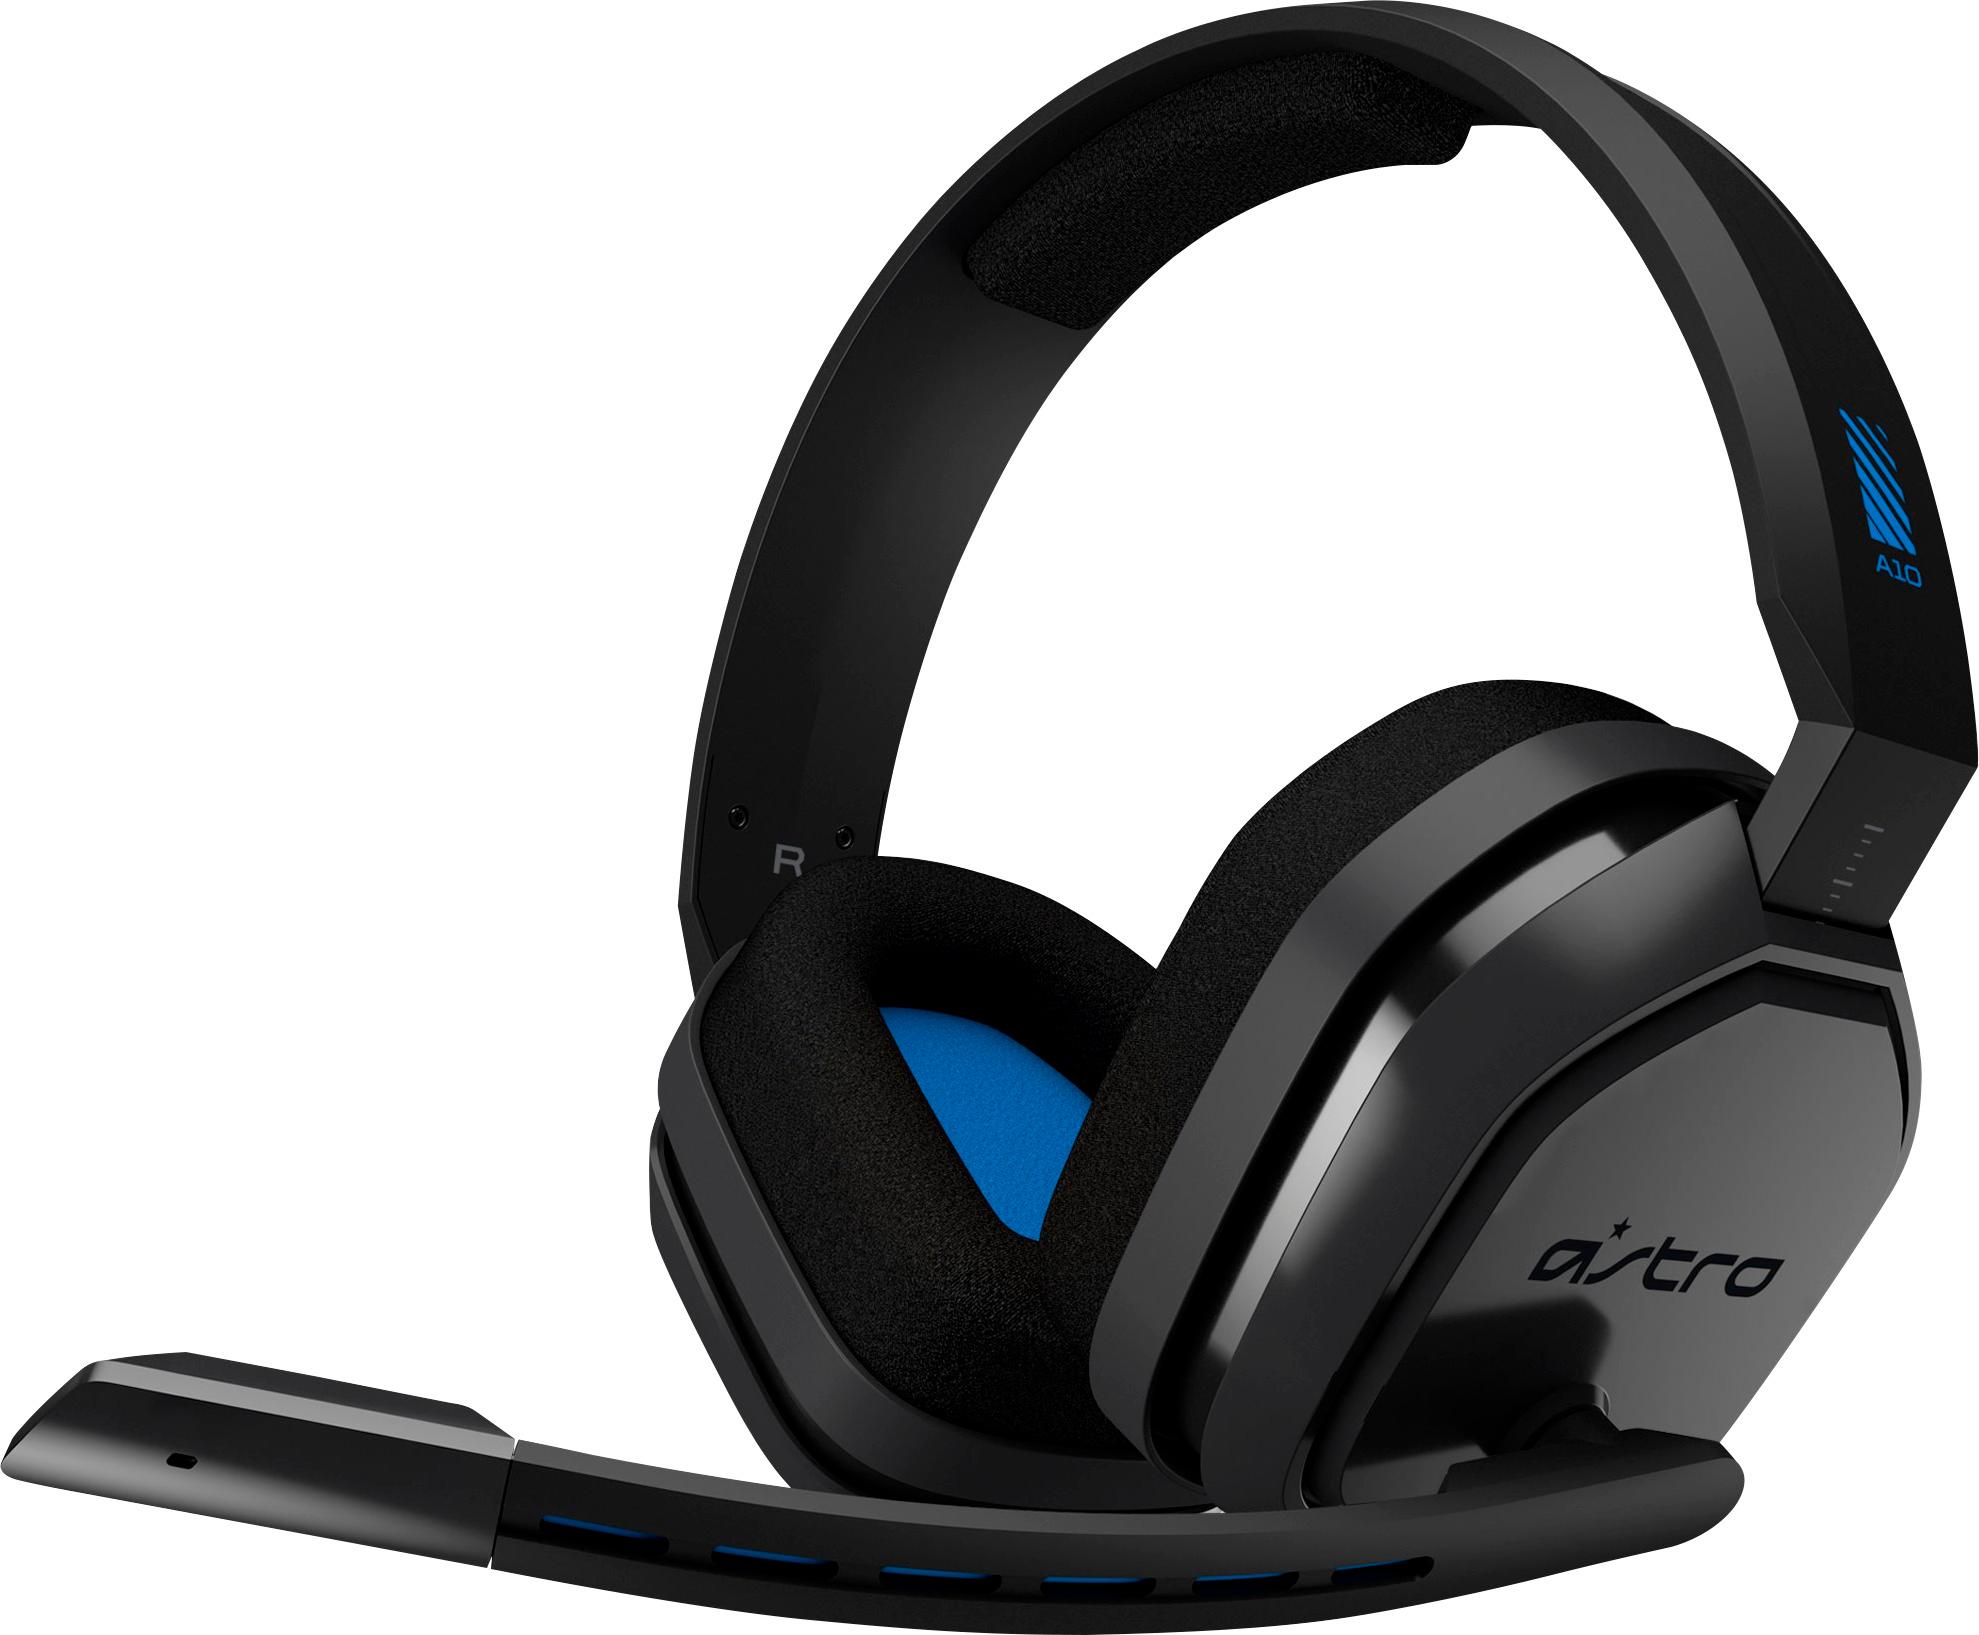 Astro Gaming A10 Wired Stereo Gaming Headset For Playstation 4 Blue Black Best Buy